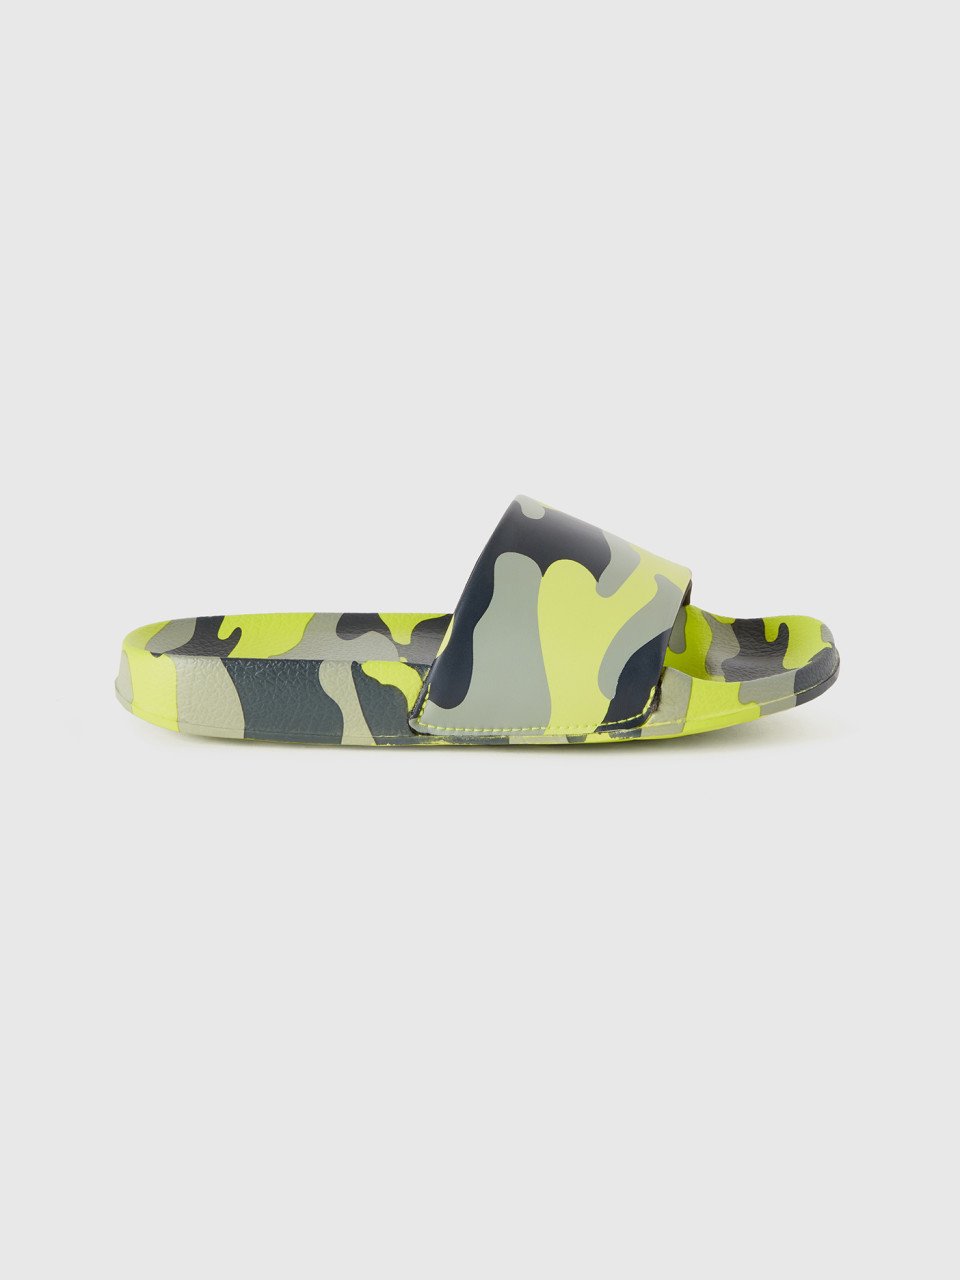 Benetton, Camouflage Slippers, Multi-color, Kids